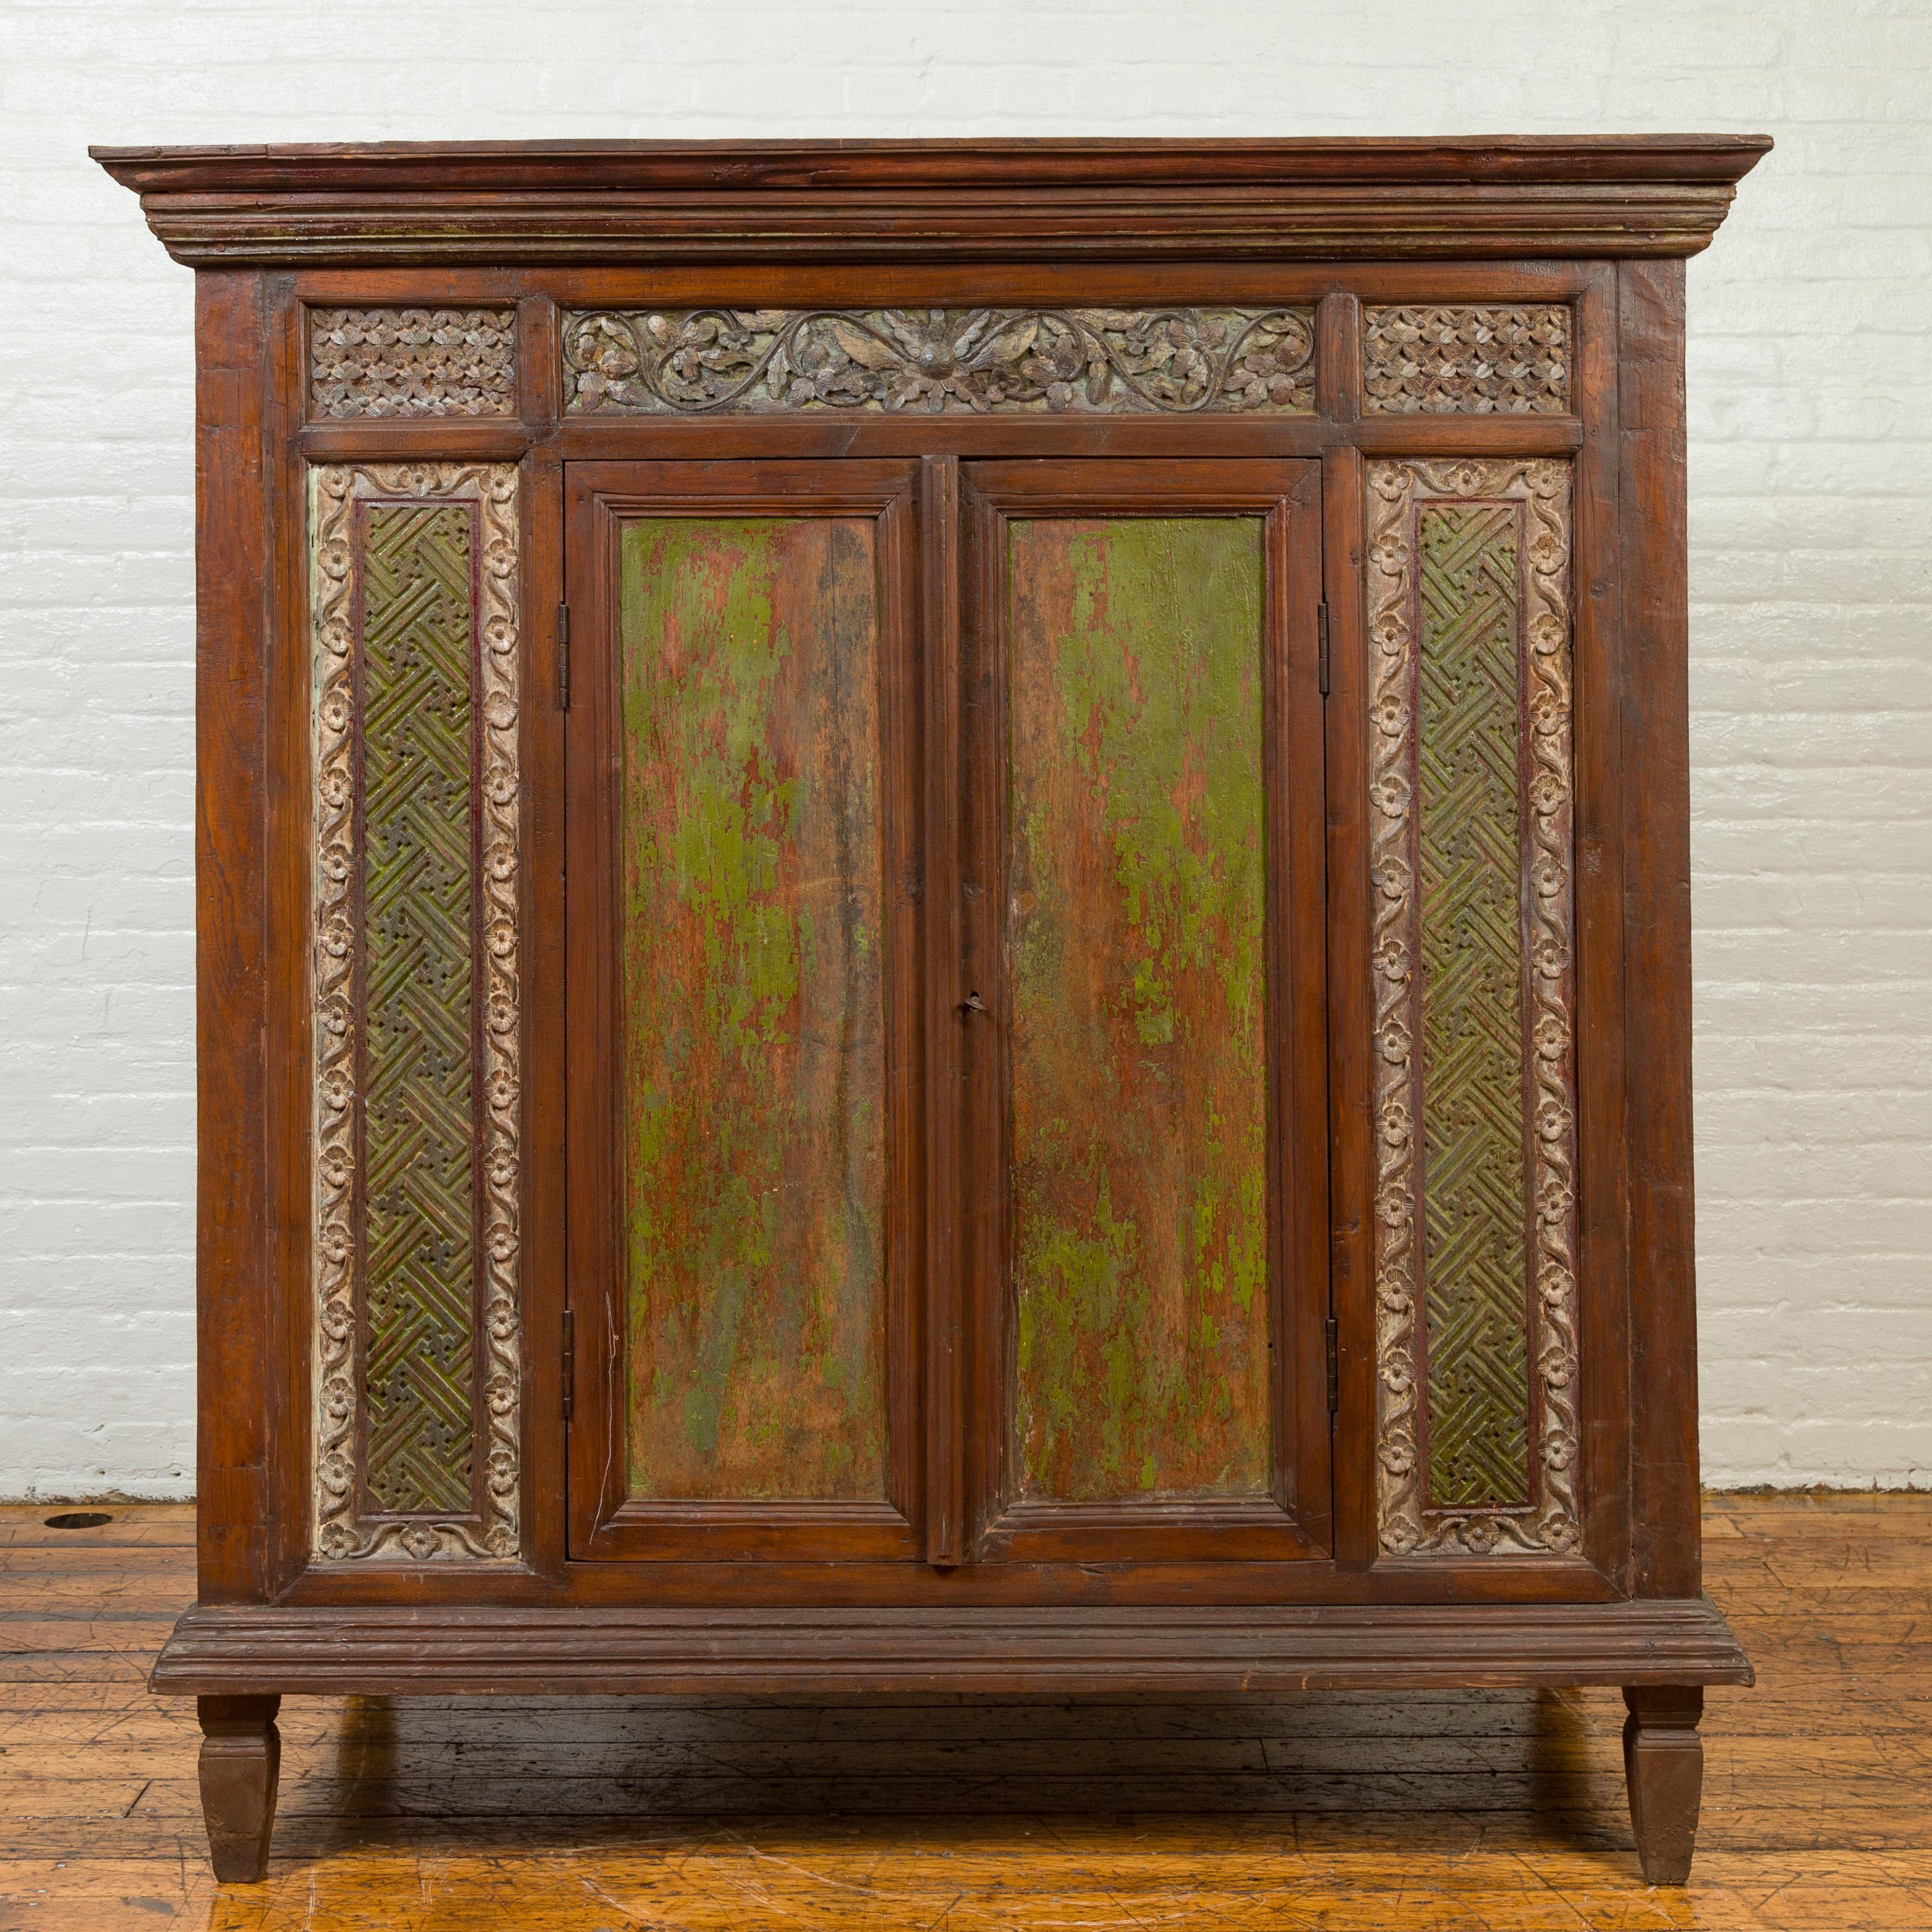 A large antique Indonesian cabinet from the 19th century, with carved floral decor and hand painted distressed decor. Crafted in Indonesia during the 19th century, this large cabinet features a molded cornice overhanging a richly carved façade